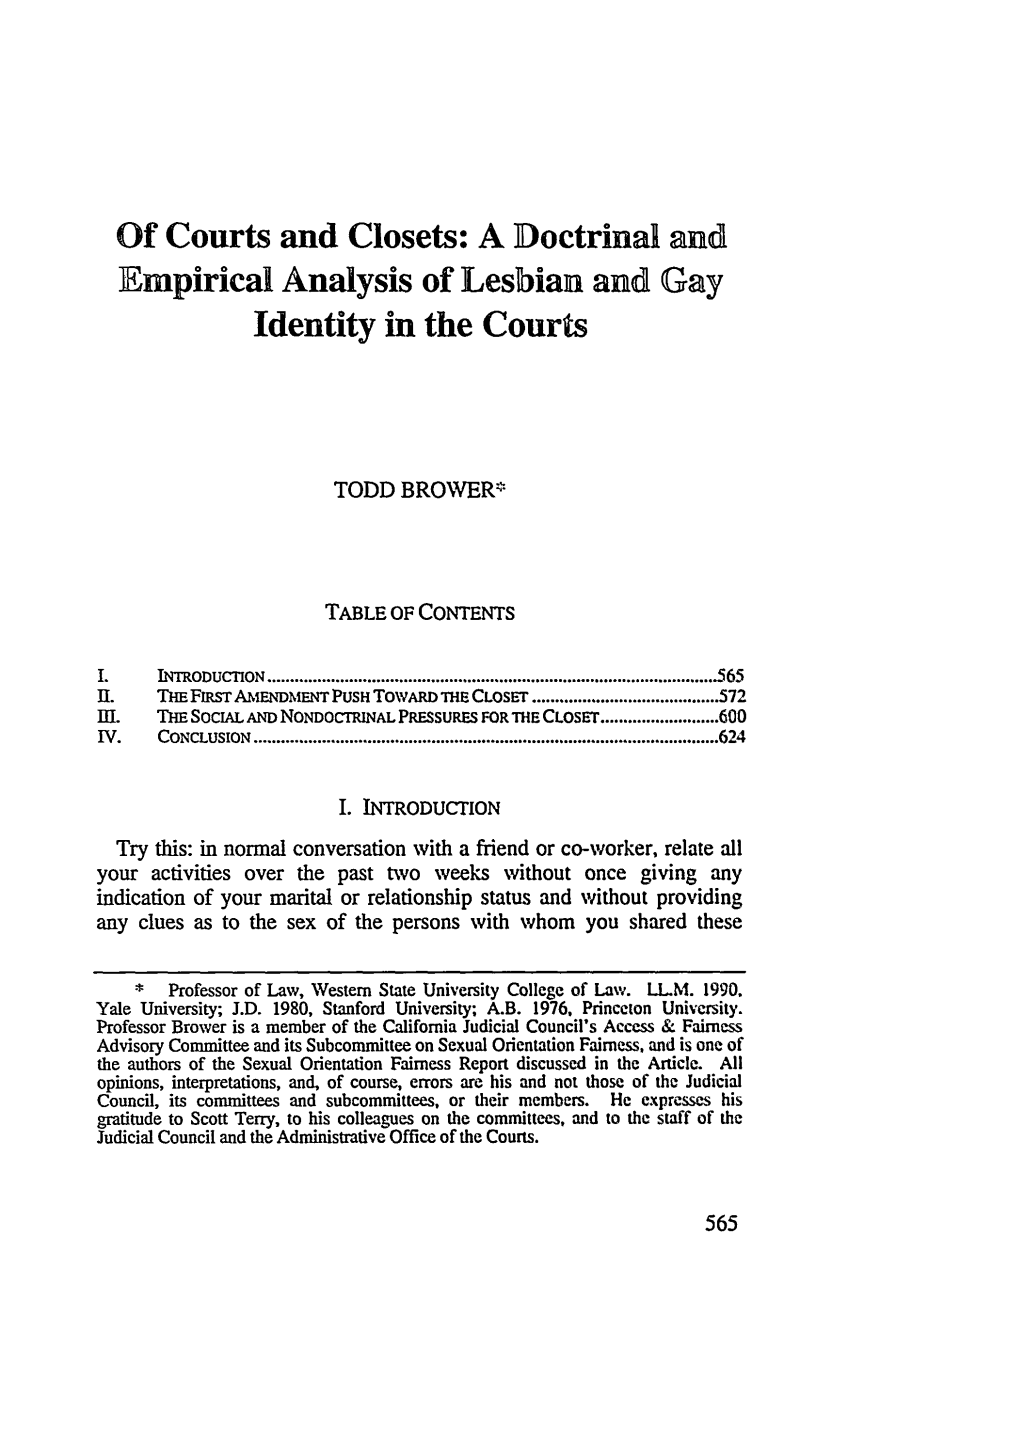 A Doctrinal and Empirical Analysis of Lesbian and Gay Identity in the Courts